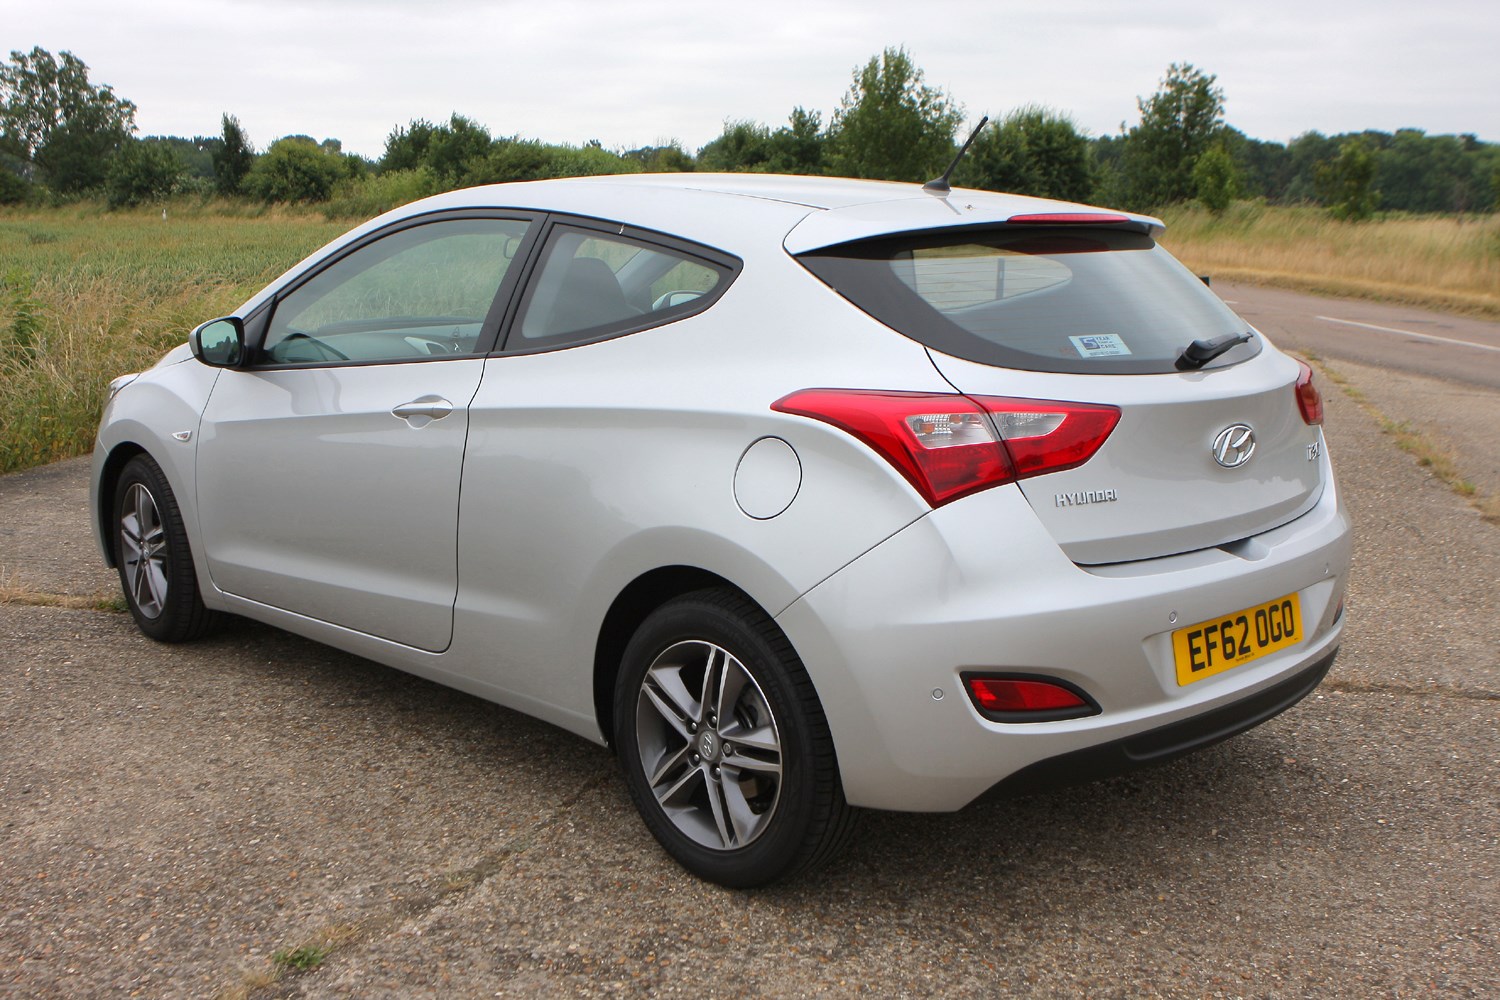 Hyundai i30 Hatchback Review Parkers